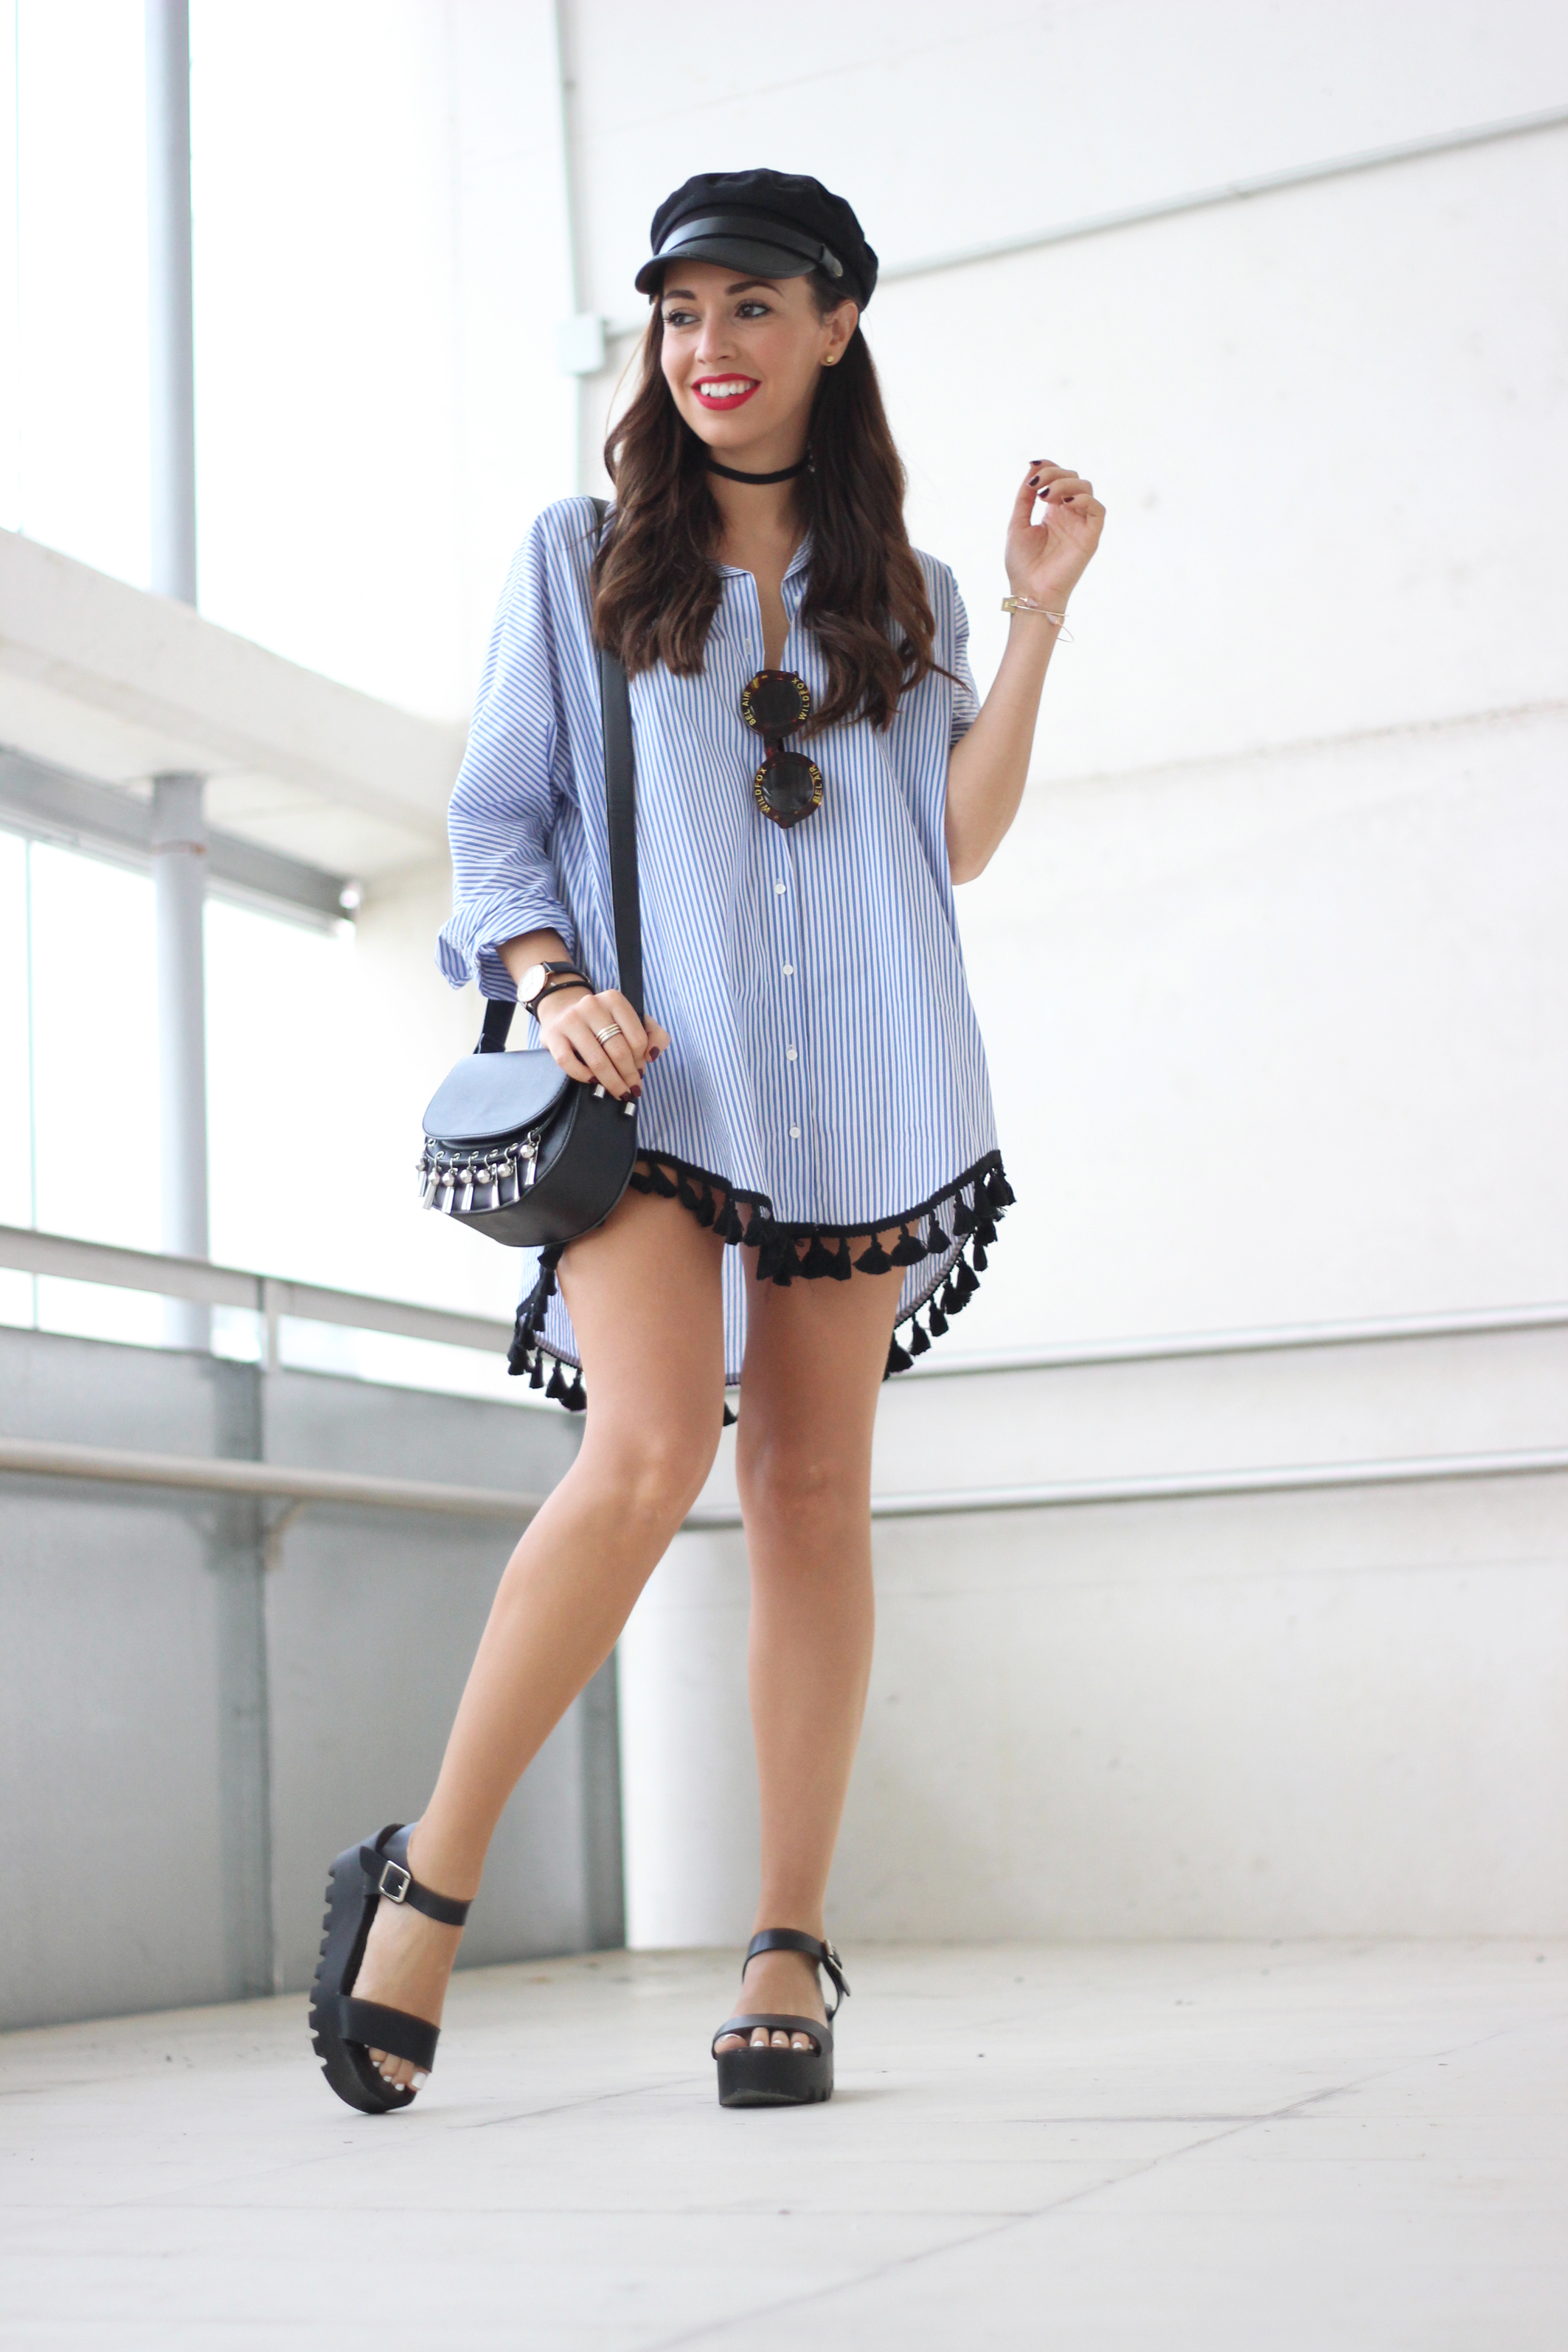 Street style, oversized trend, Striped shirt with pompoms, shirt dress, military black cap, chunky sandals